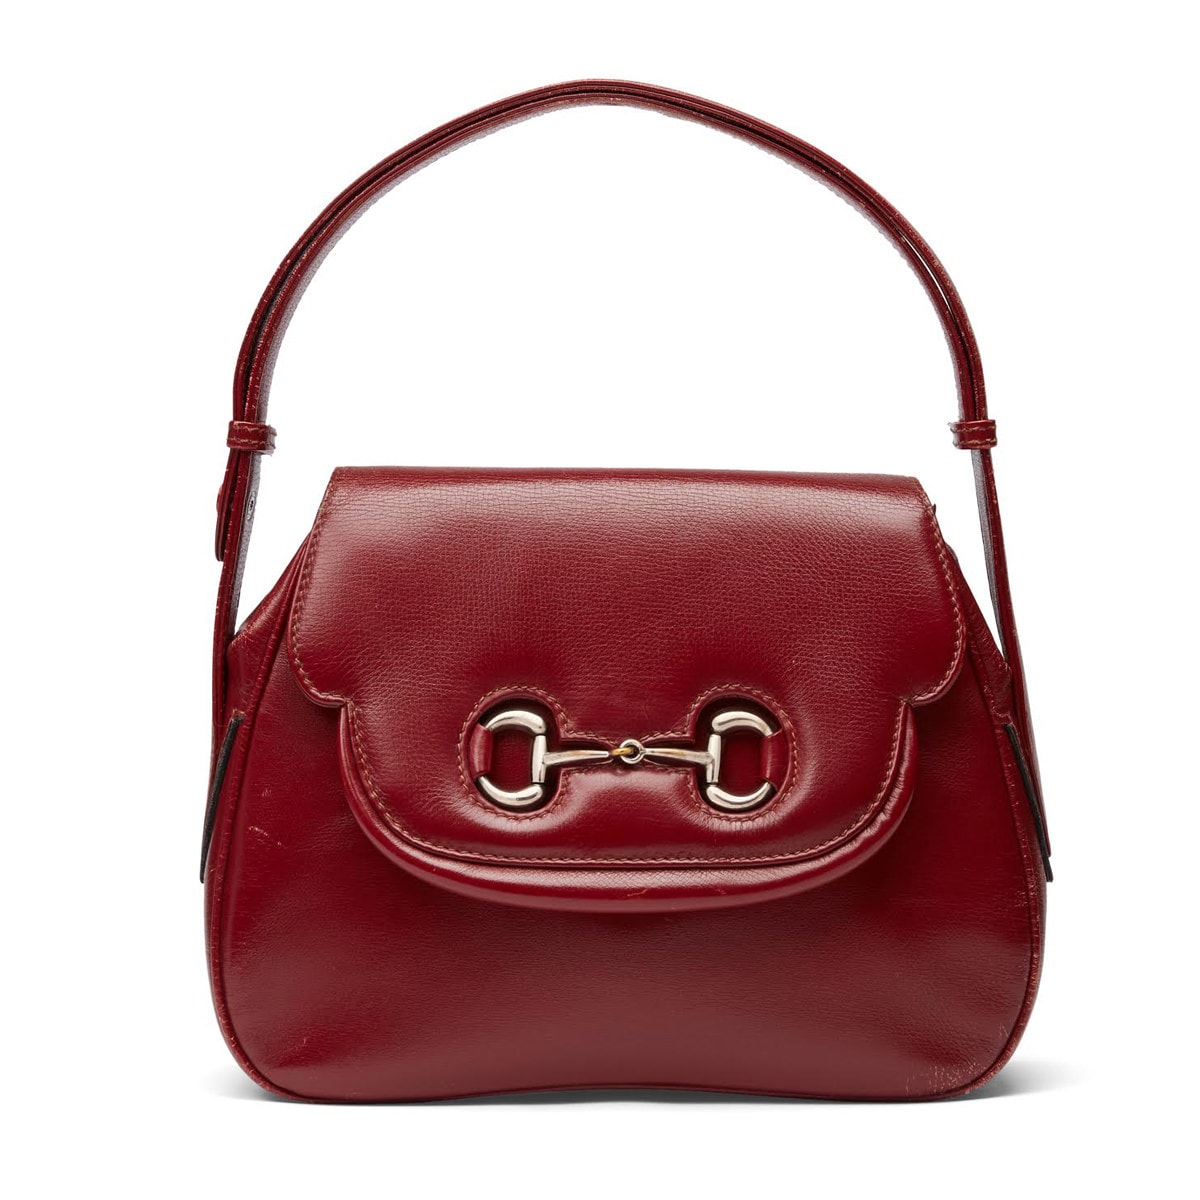 Gucci Horsebit 1955: How A Vintage Icon Became An It Bag